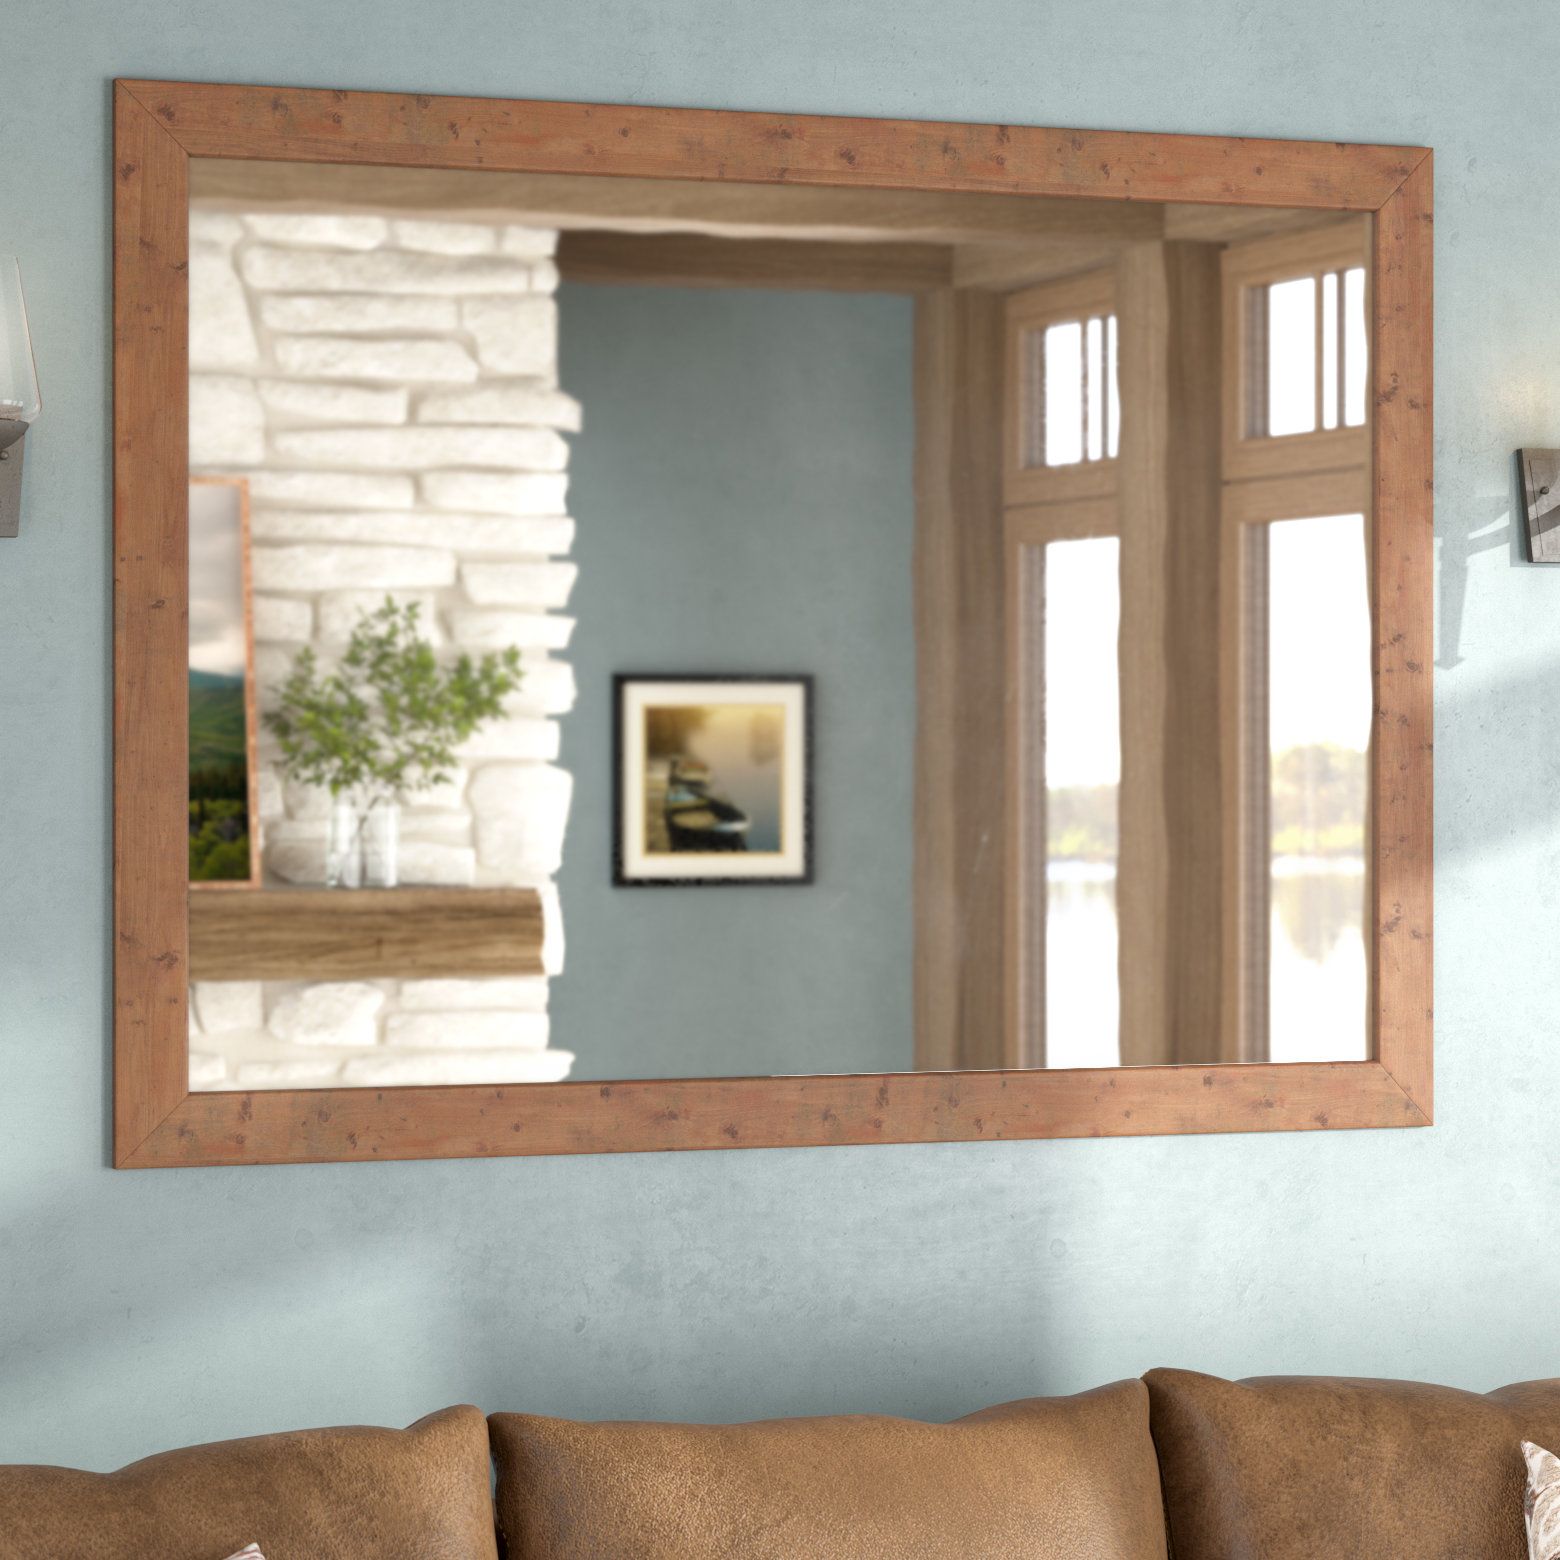 Union Rustic Landover Accent Mirror Inside Most Popular Tifton Traditional Beveled Accent Mirrors (View 17 of 20)